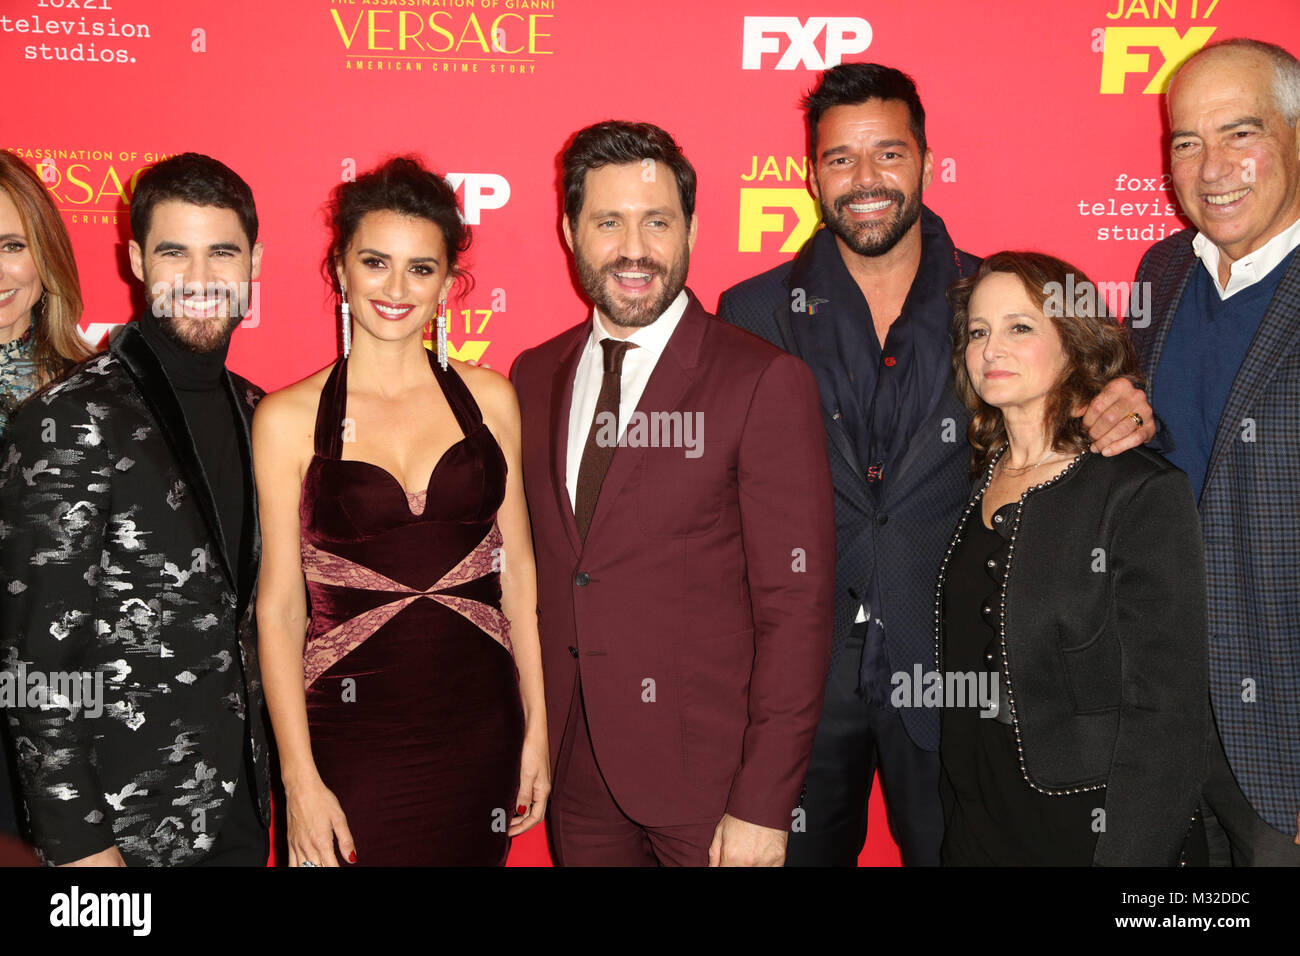 Celebrities attend FX’s 'The Assassination of Gianni Versace: American Crime Story' Premiere at ArcLight Hollywood.  Featuring: Dana Walden, Darren Criss, Penelope Cruz, Edgar Ramirez, Ricky Martin, Nina Jacobson and Gary Newman Where: Los Angeles, California, United States When: 09 Jan 2018 Credit: Brian To/WENN.com Stock Photo